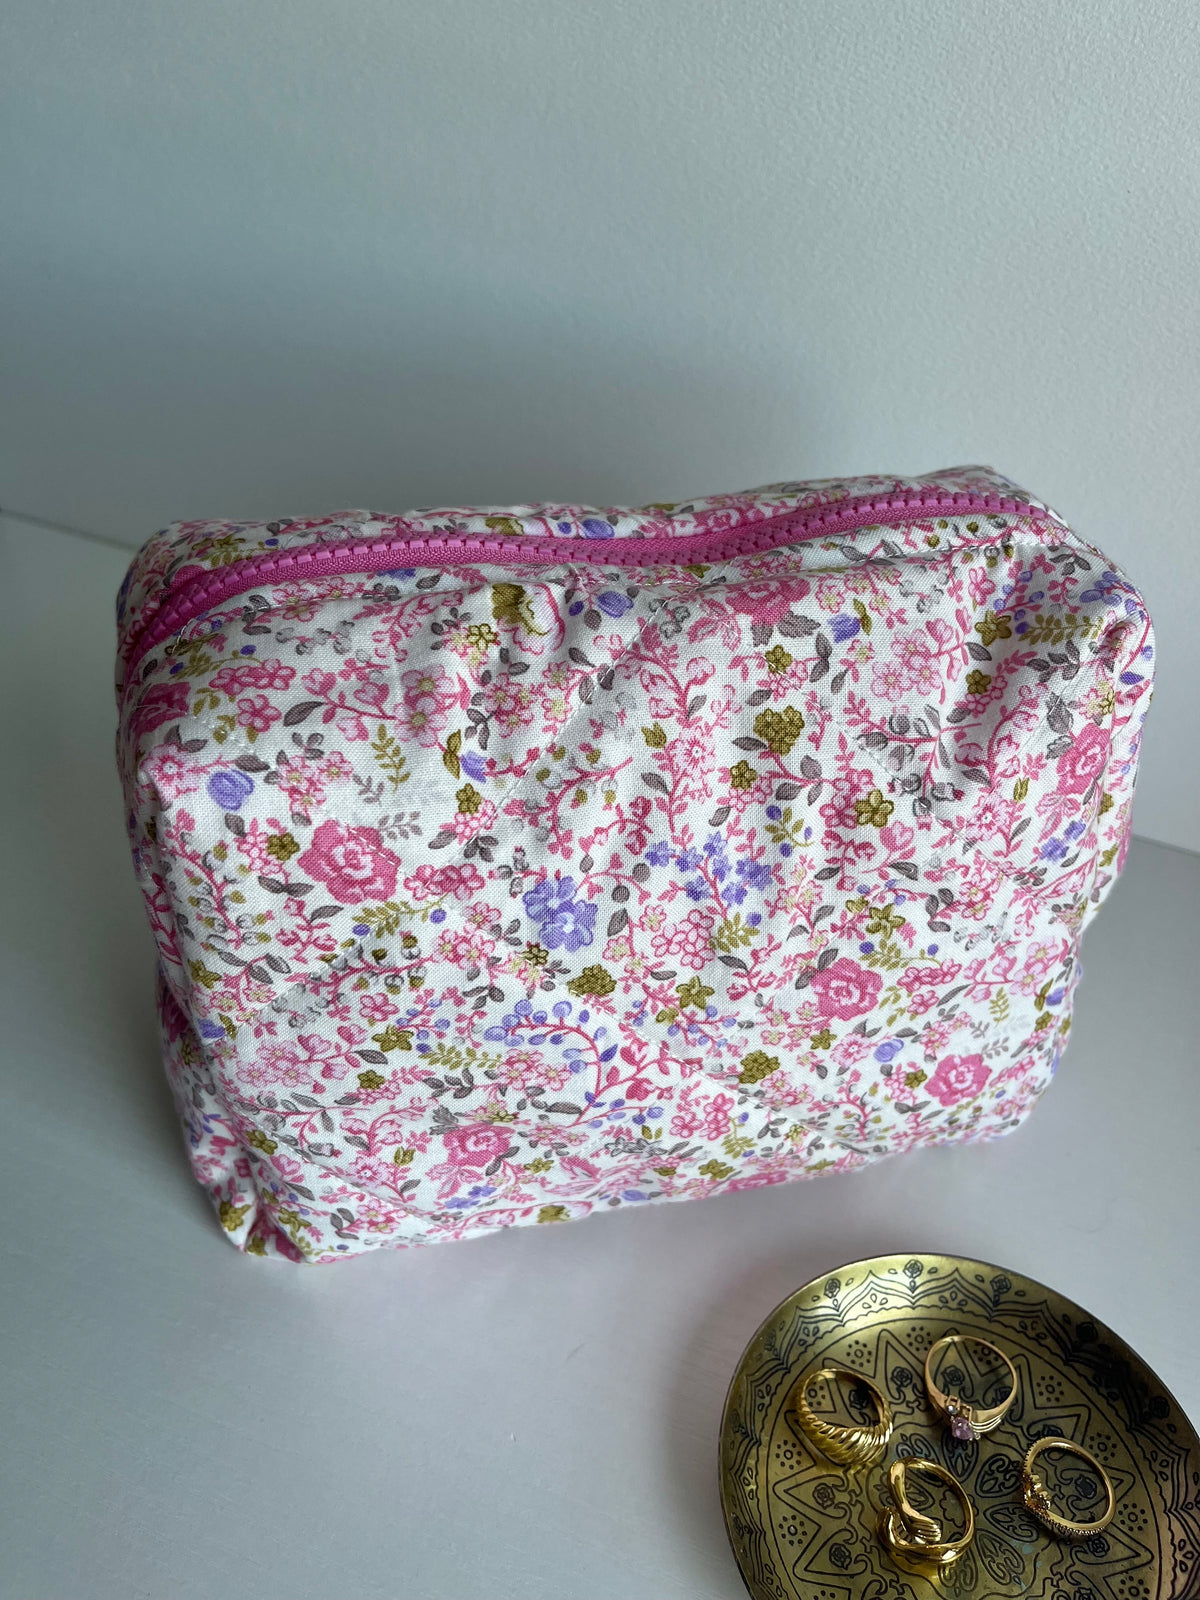 With Love, Loryn - Cosmetic Bag